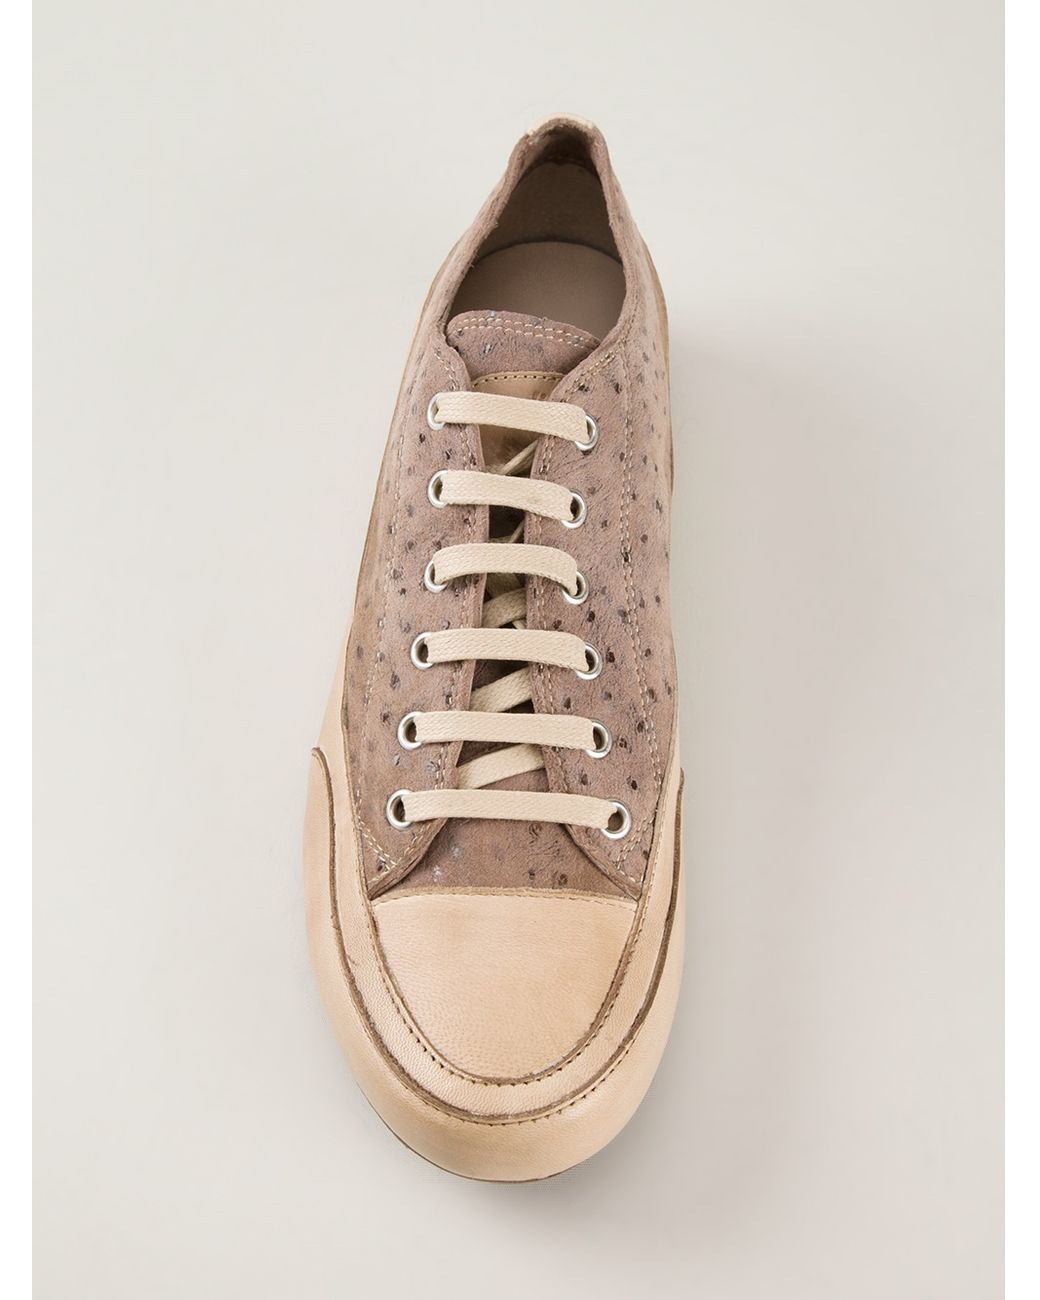 Candice Cooper Laceup Trainer in Natural | Lyst